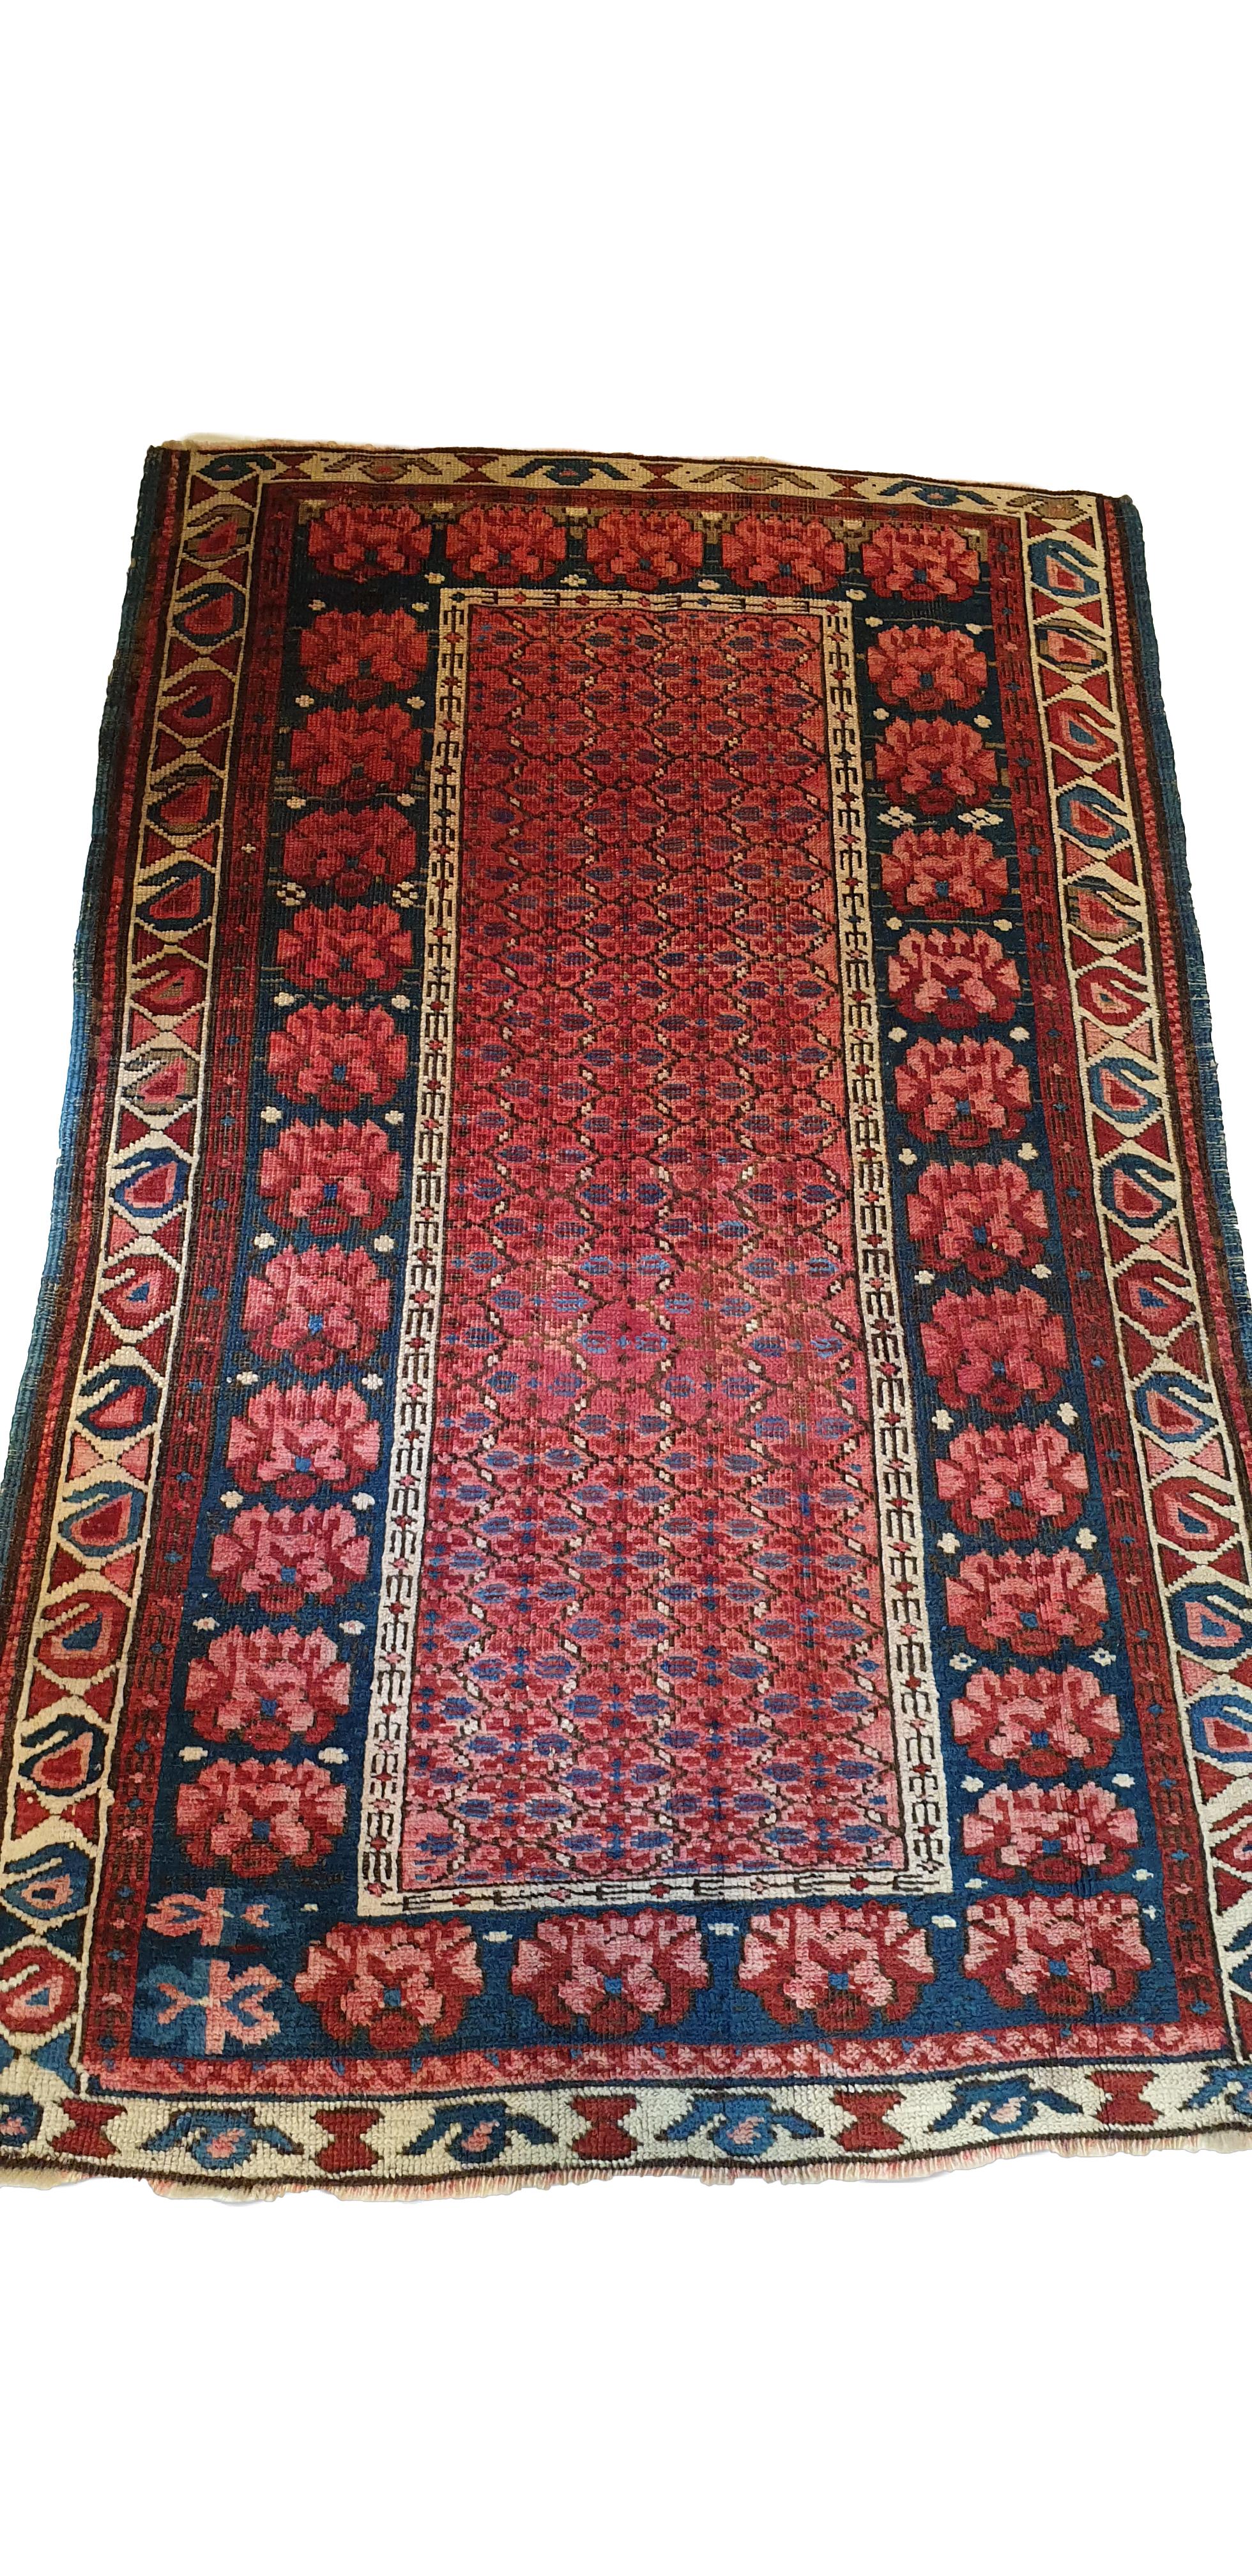 Hand knotted carpet in Russia at the beginning of the 19th century.
Representation of red flowers mainly in the rectangle in the center and the same, larger flowers form the outline.
High quality, beautiful graphics and remarkable finesse.
Perfect